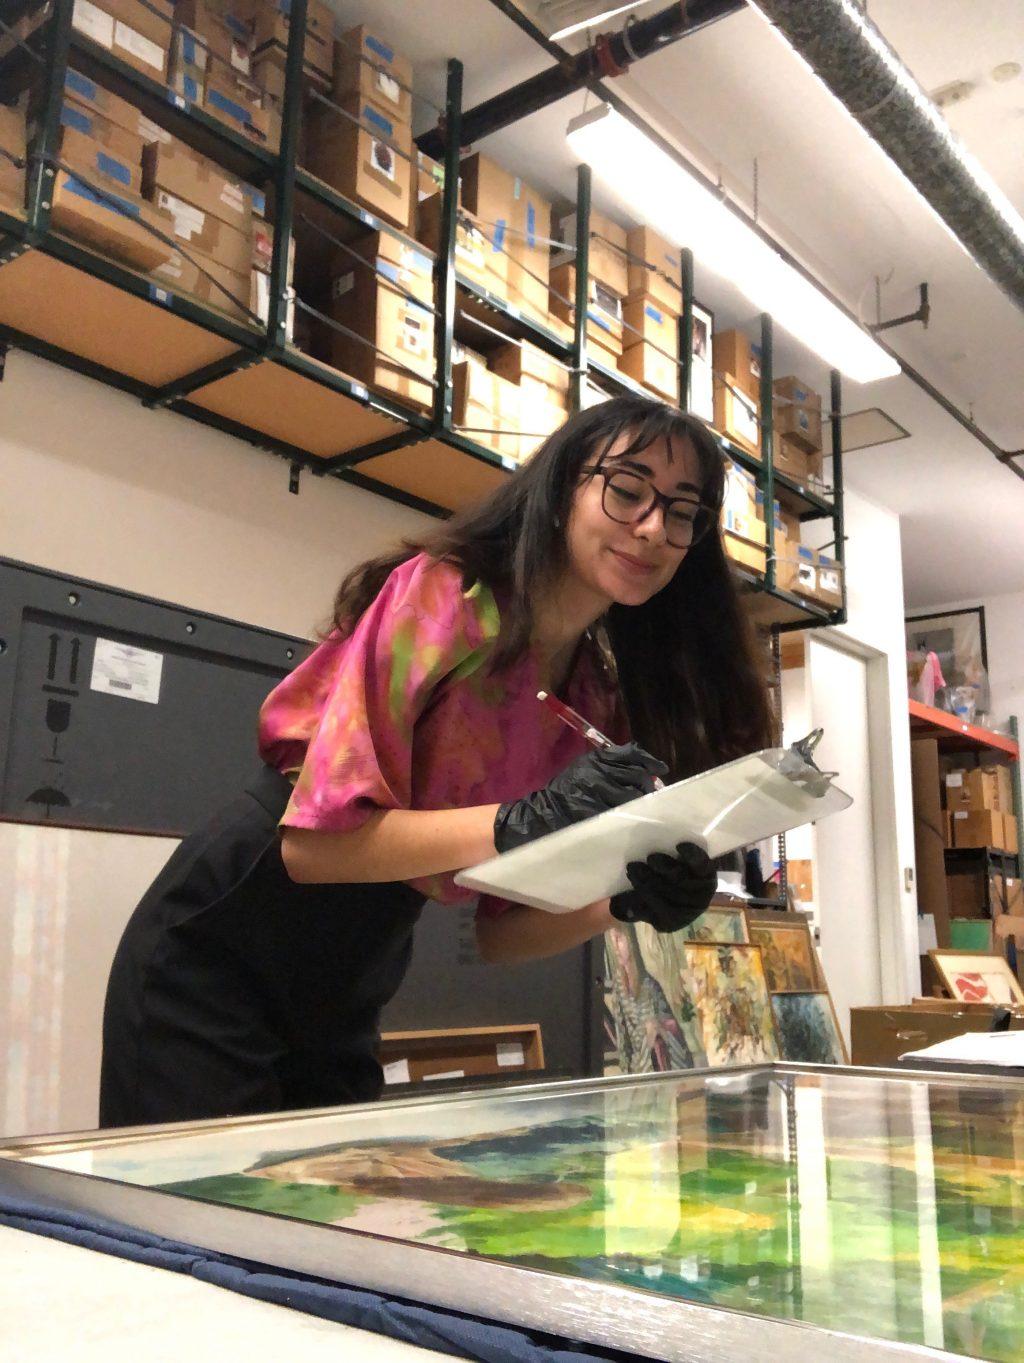 Campbell writes down notes on a painting during her internship in July 2019 at the Long Beach Museum of Art. Campbell said she learned a lot about museum work and local artists through her jobs at both the Long Beach Museum of Art and the Weisman Museum of Art on the Malibu campus.